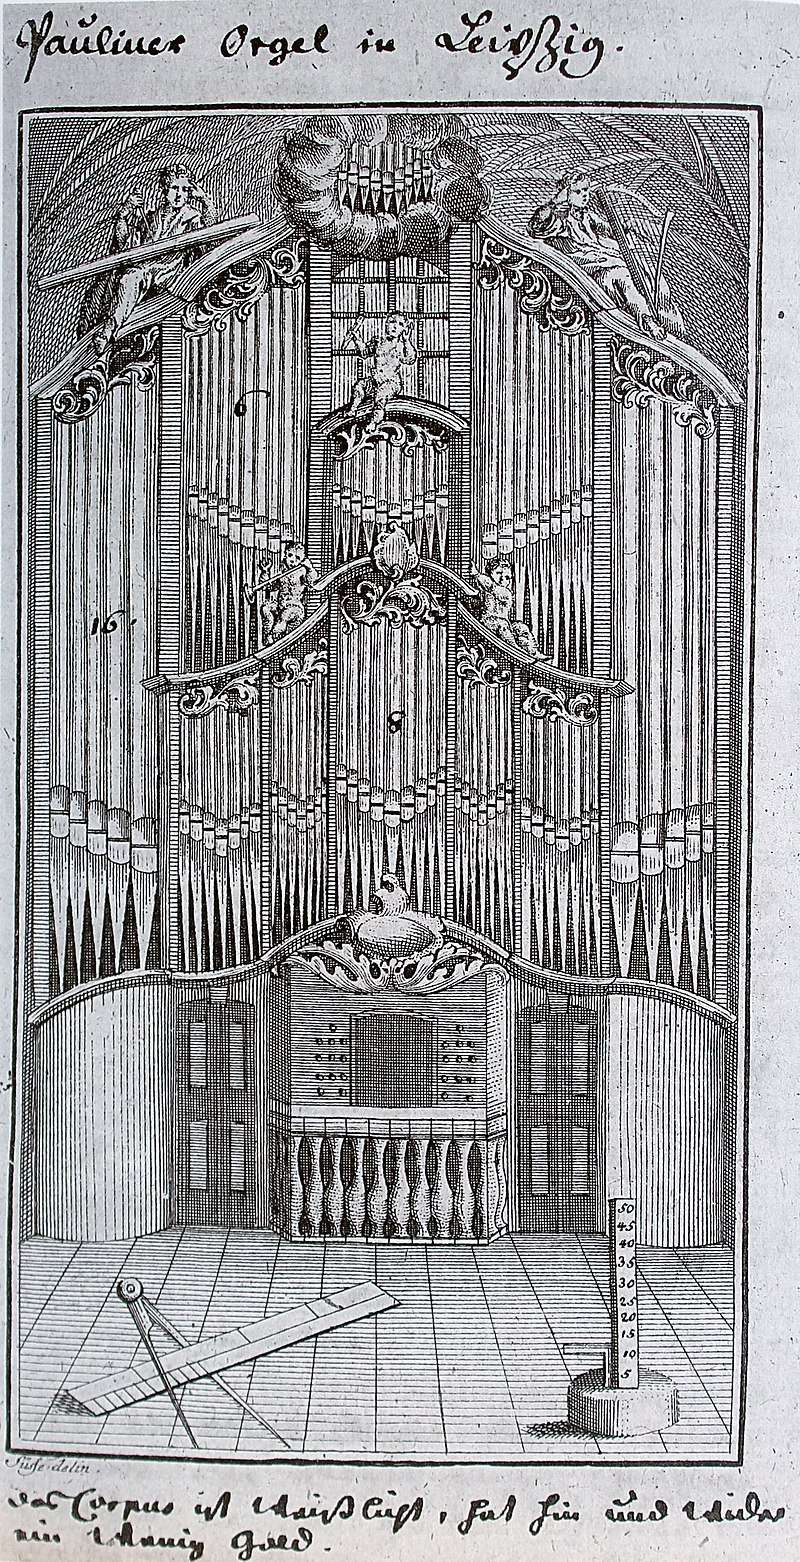 Organ of the St. Paul's Church in Leipzig, tested by Bach in 1717.